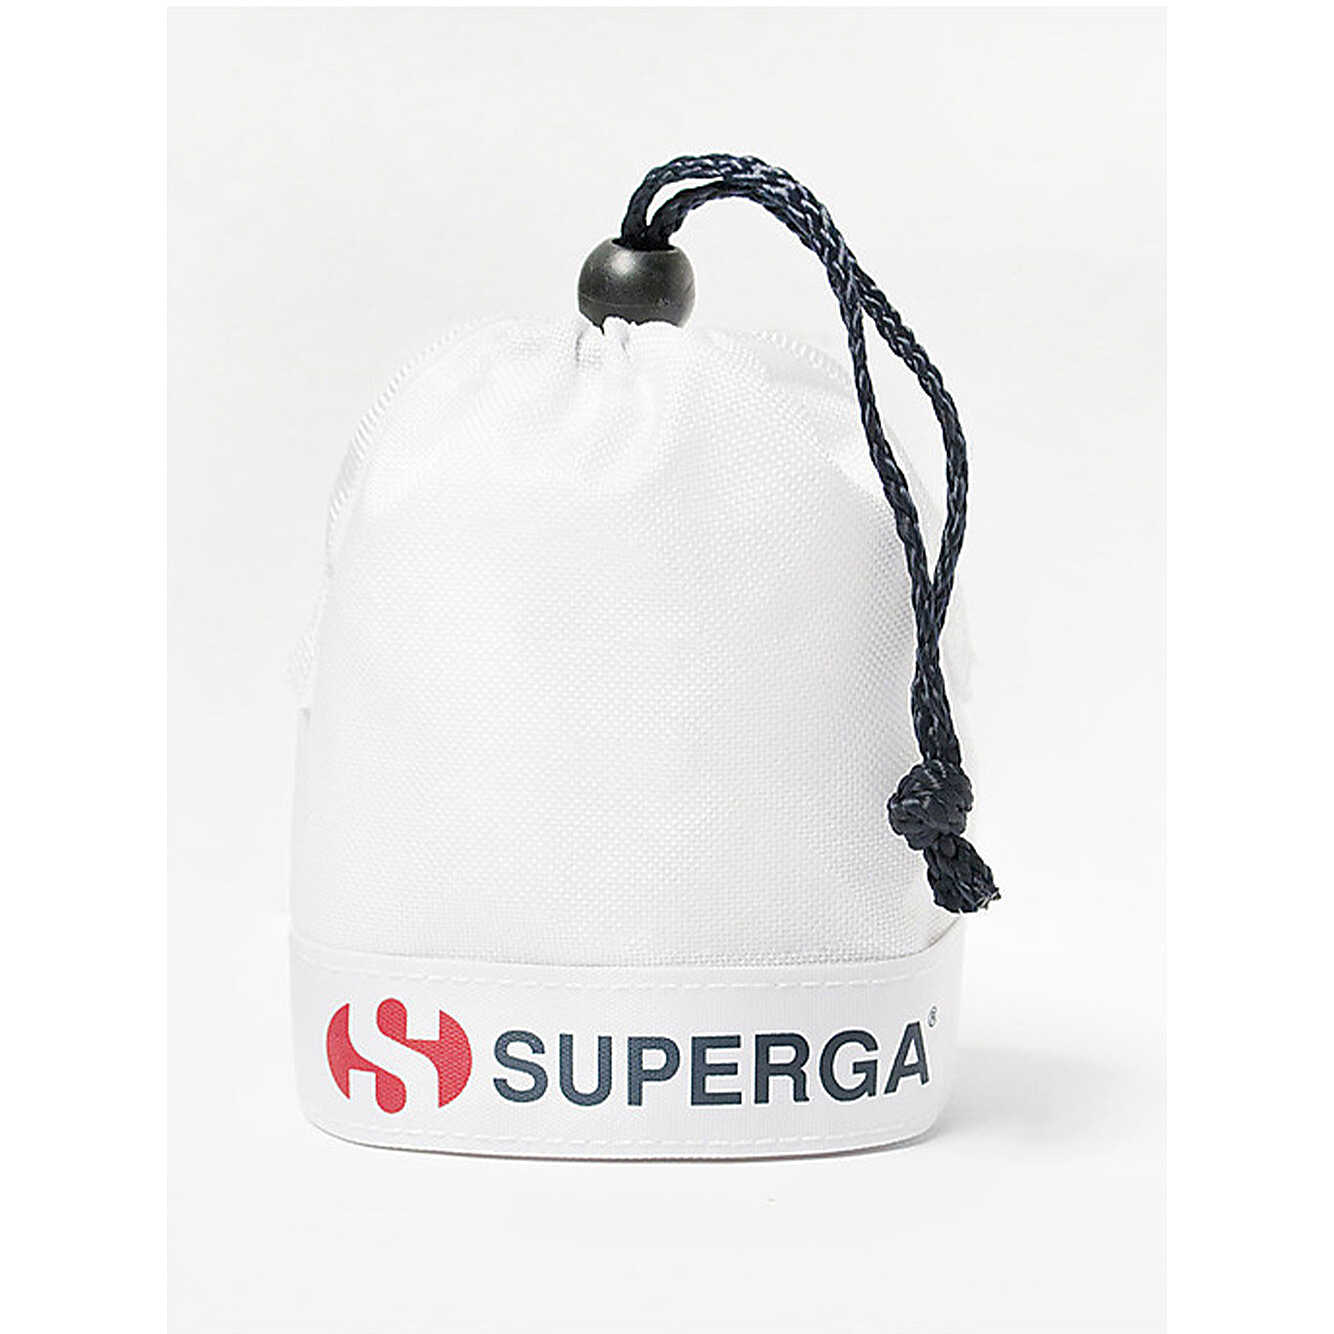 package only time Superga STC065